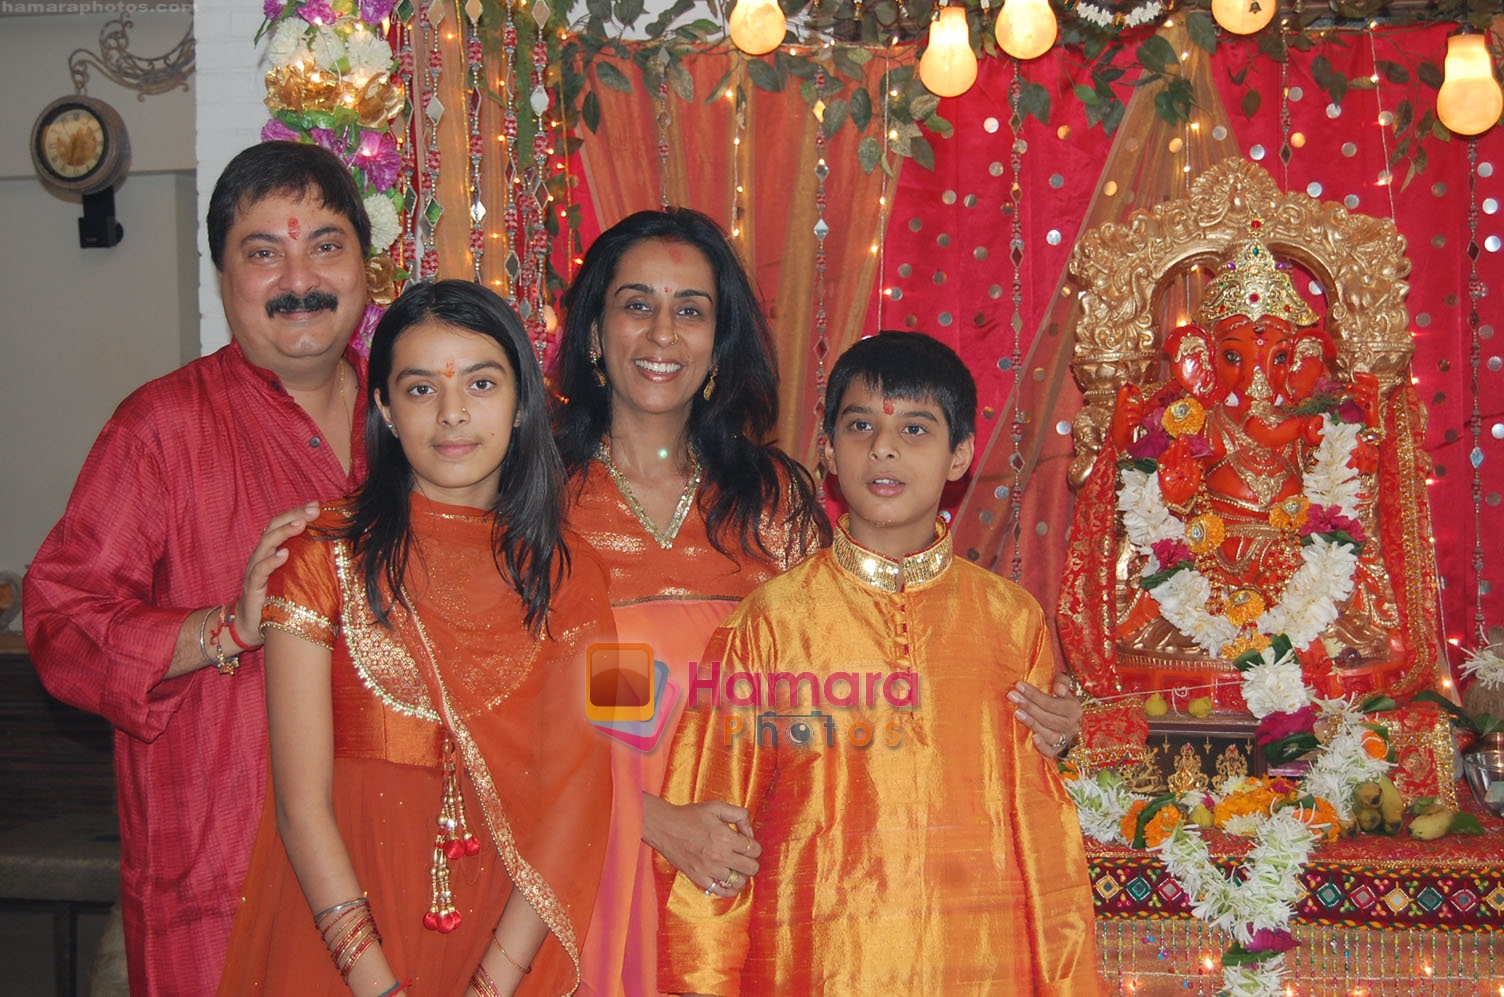 Tony and Deeya Singh with Gia and Jashan at the Tony Singh's Ganesh Pooja on 23rd Aug 2009